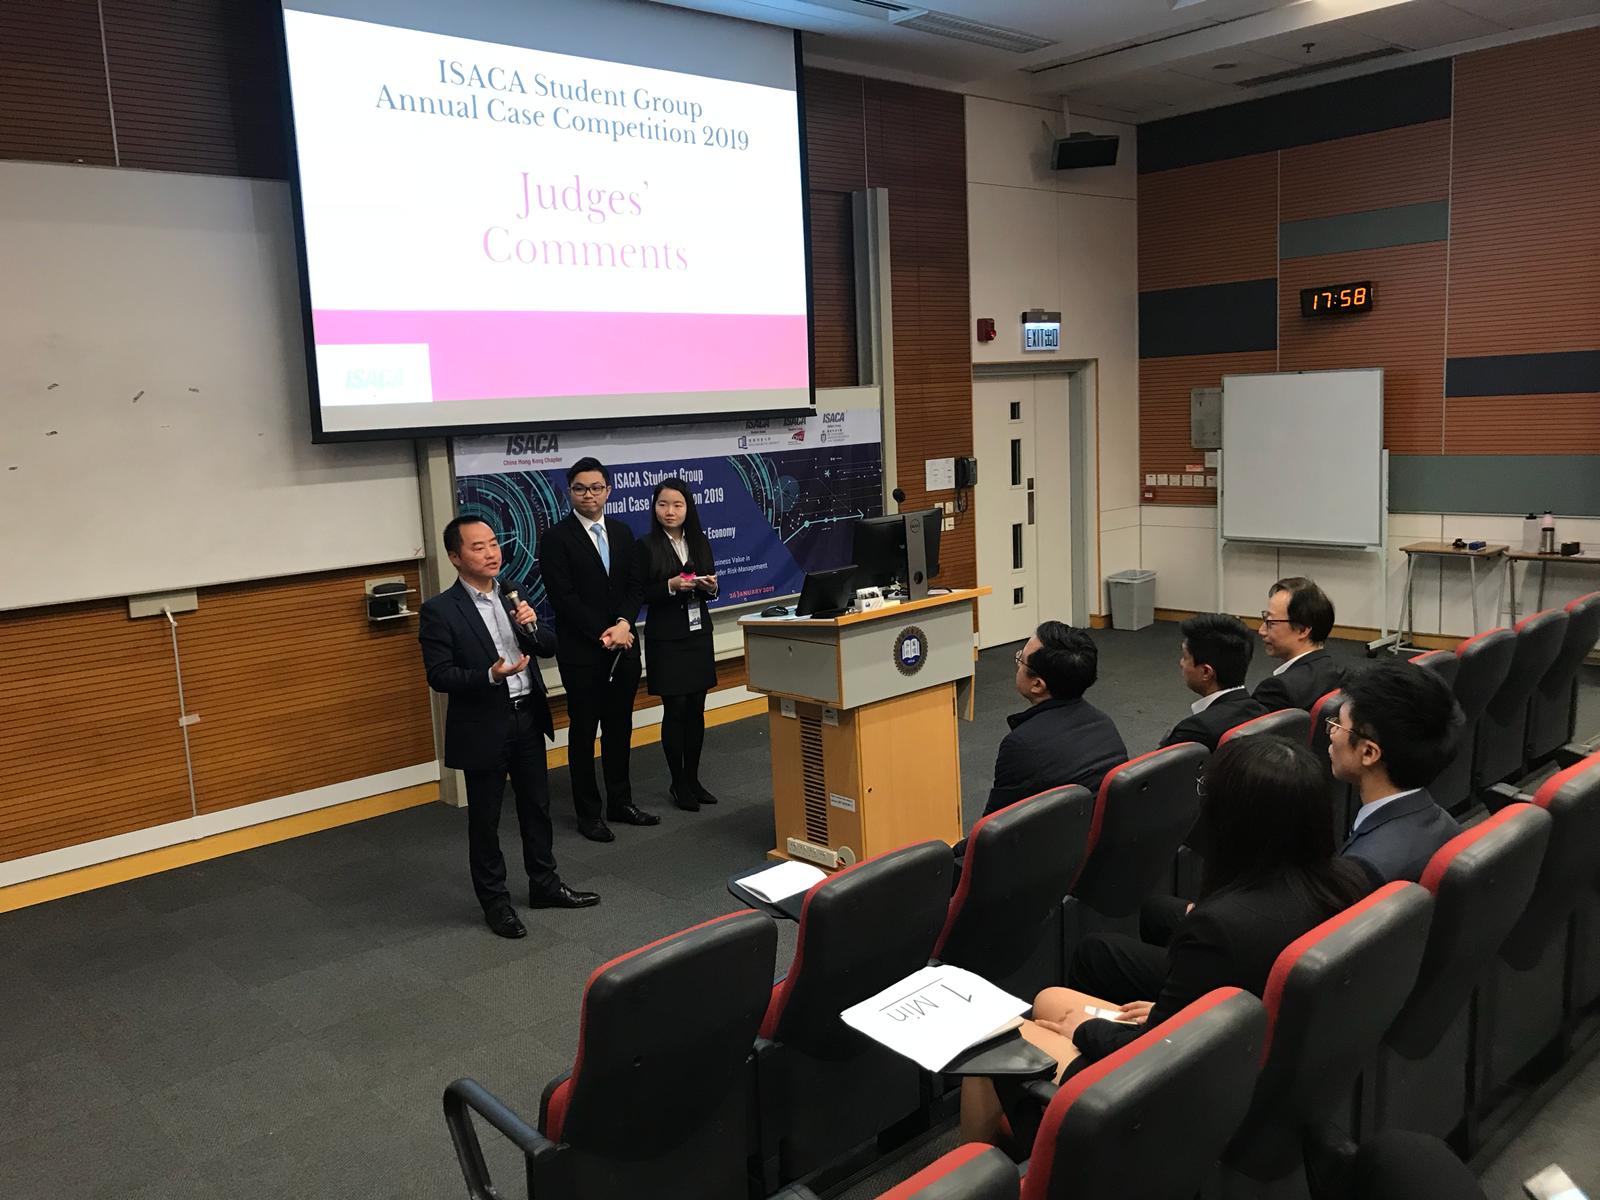 Mr. Tony Wong, Assistant Government Chief Information Officer (Industry Development), gives comments to students at the “ISACA Student Group Annual Case Competition 2019”.